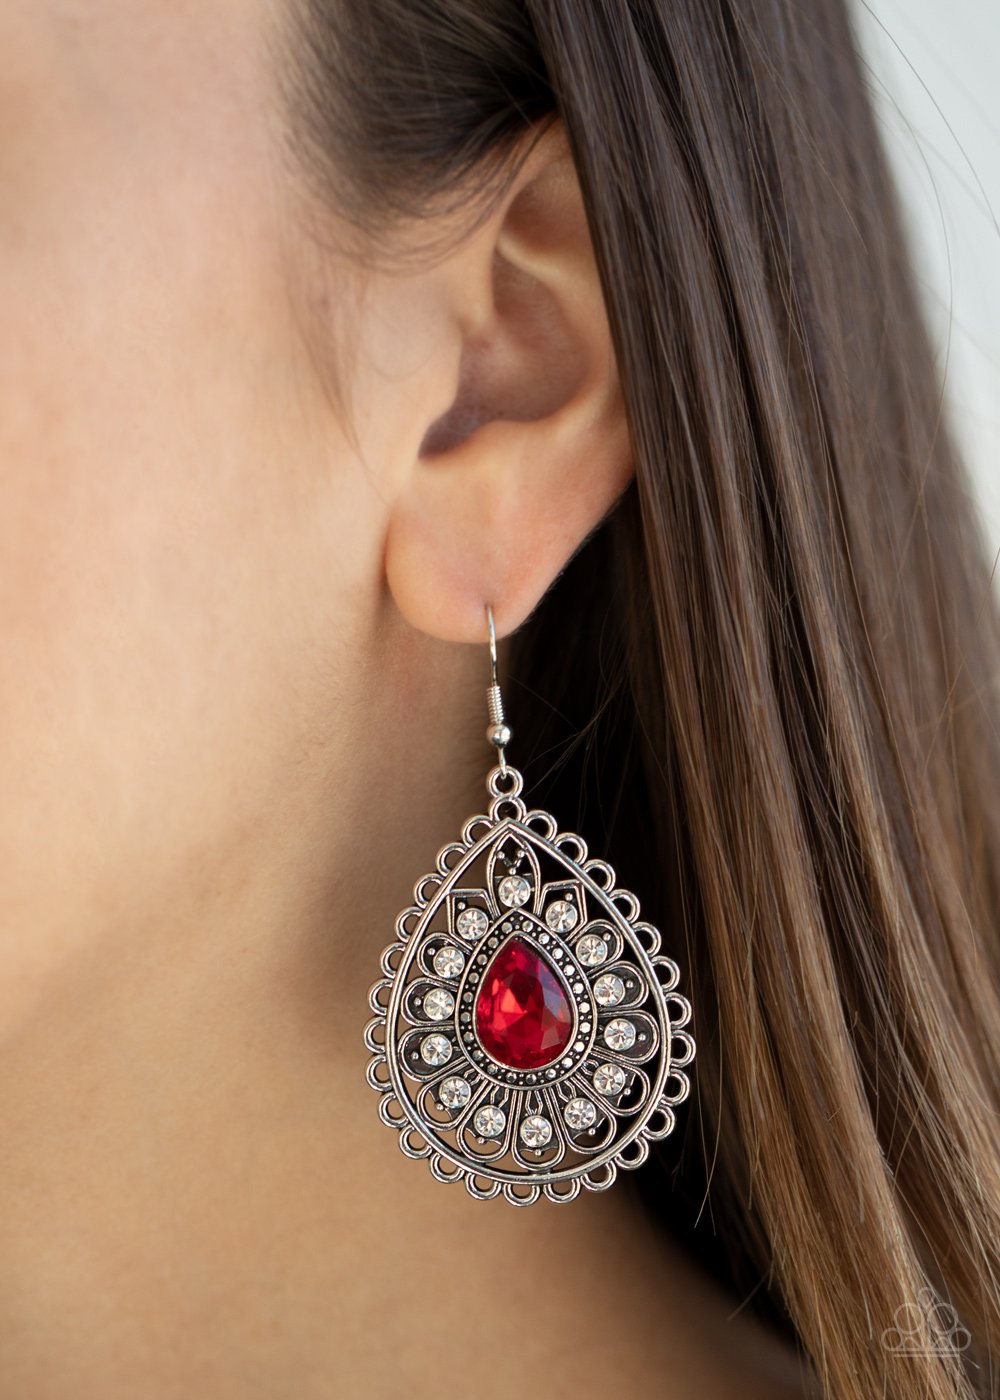 Paparazzi Accessories - Eat Drink And Beam Ready - Red Earrings